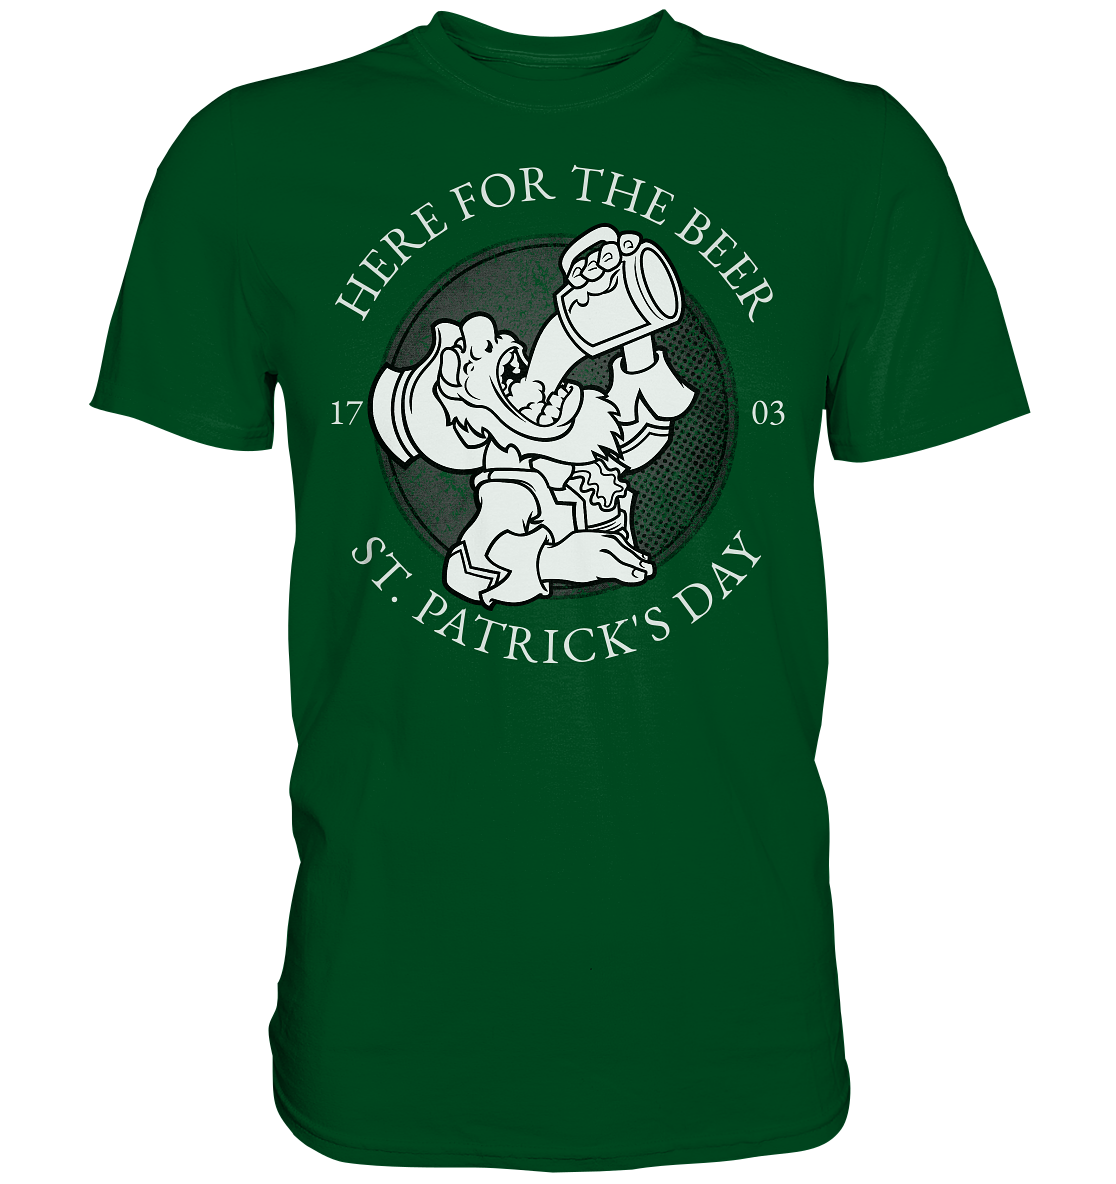 Here For The Beer "St. Patrick's Day" - Premium Shirt